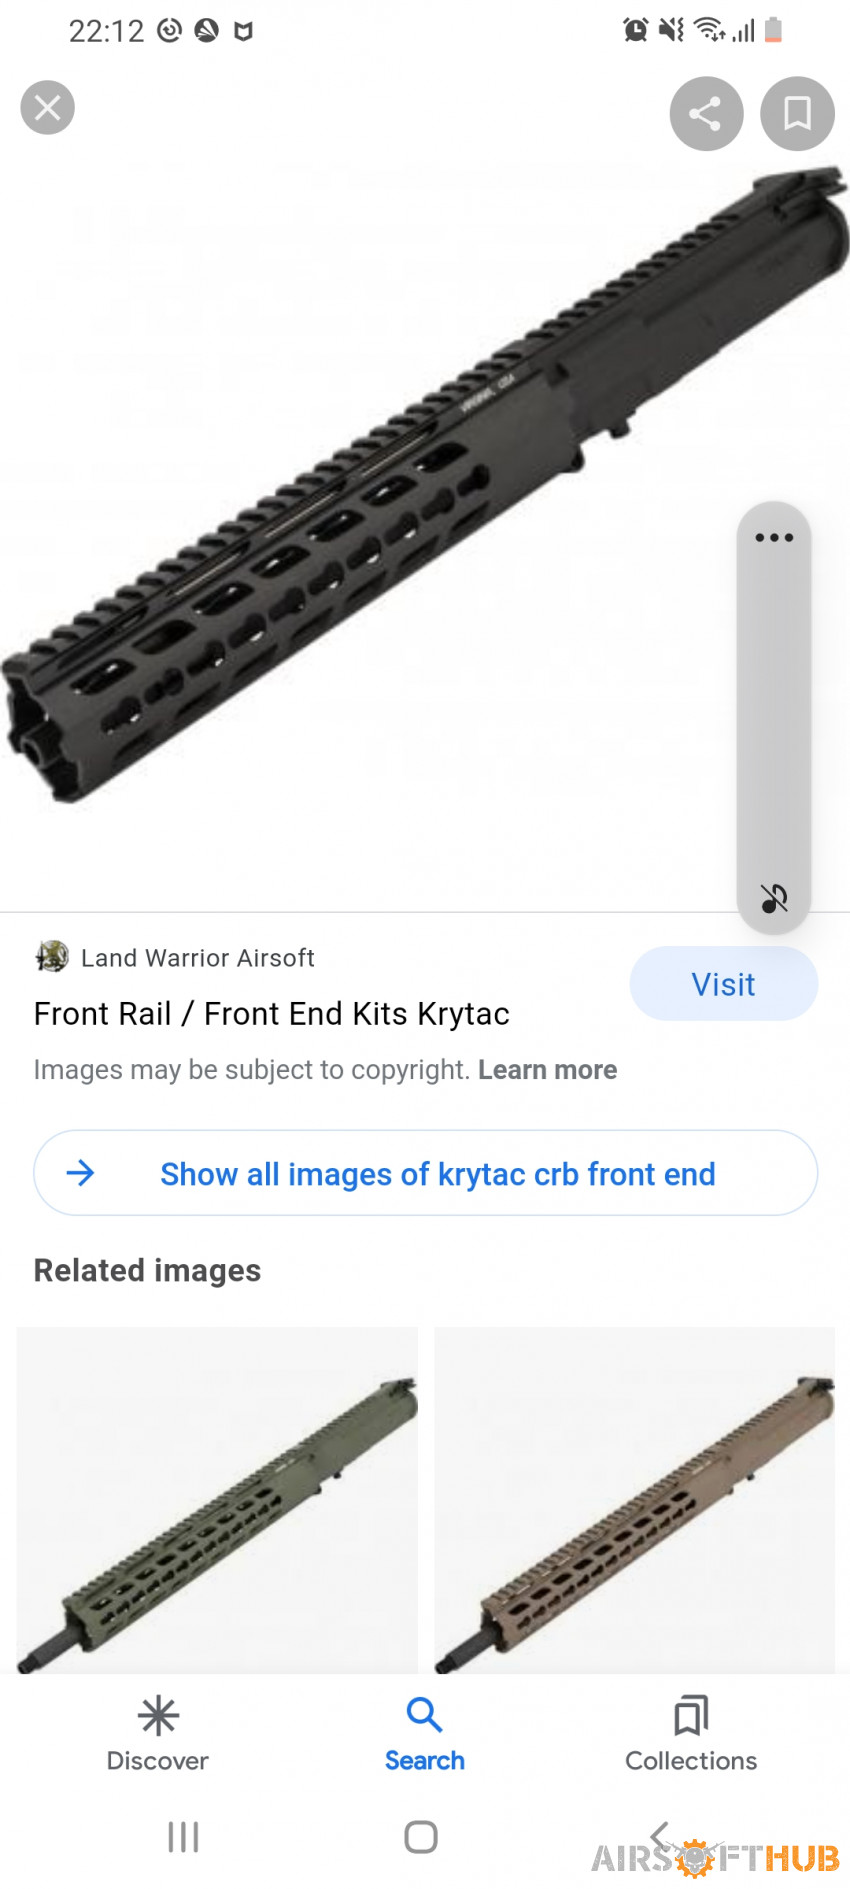 Krytac crb front end - Used airsoft equipment